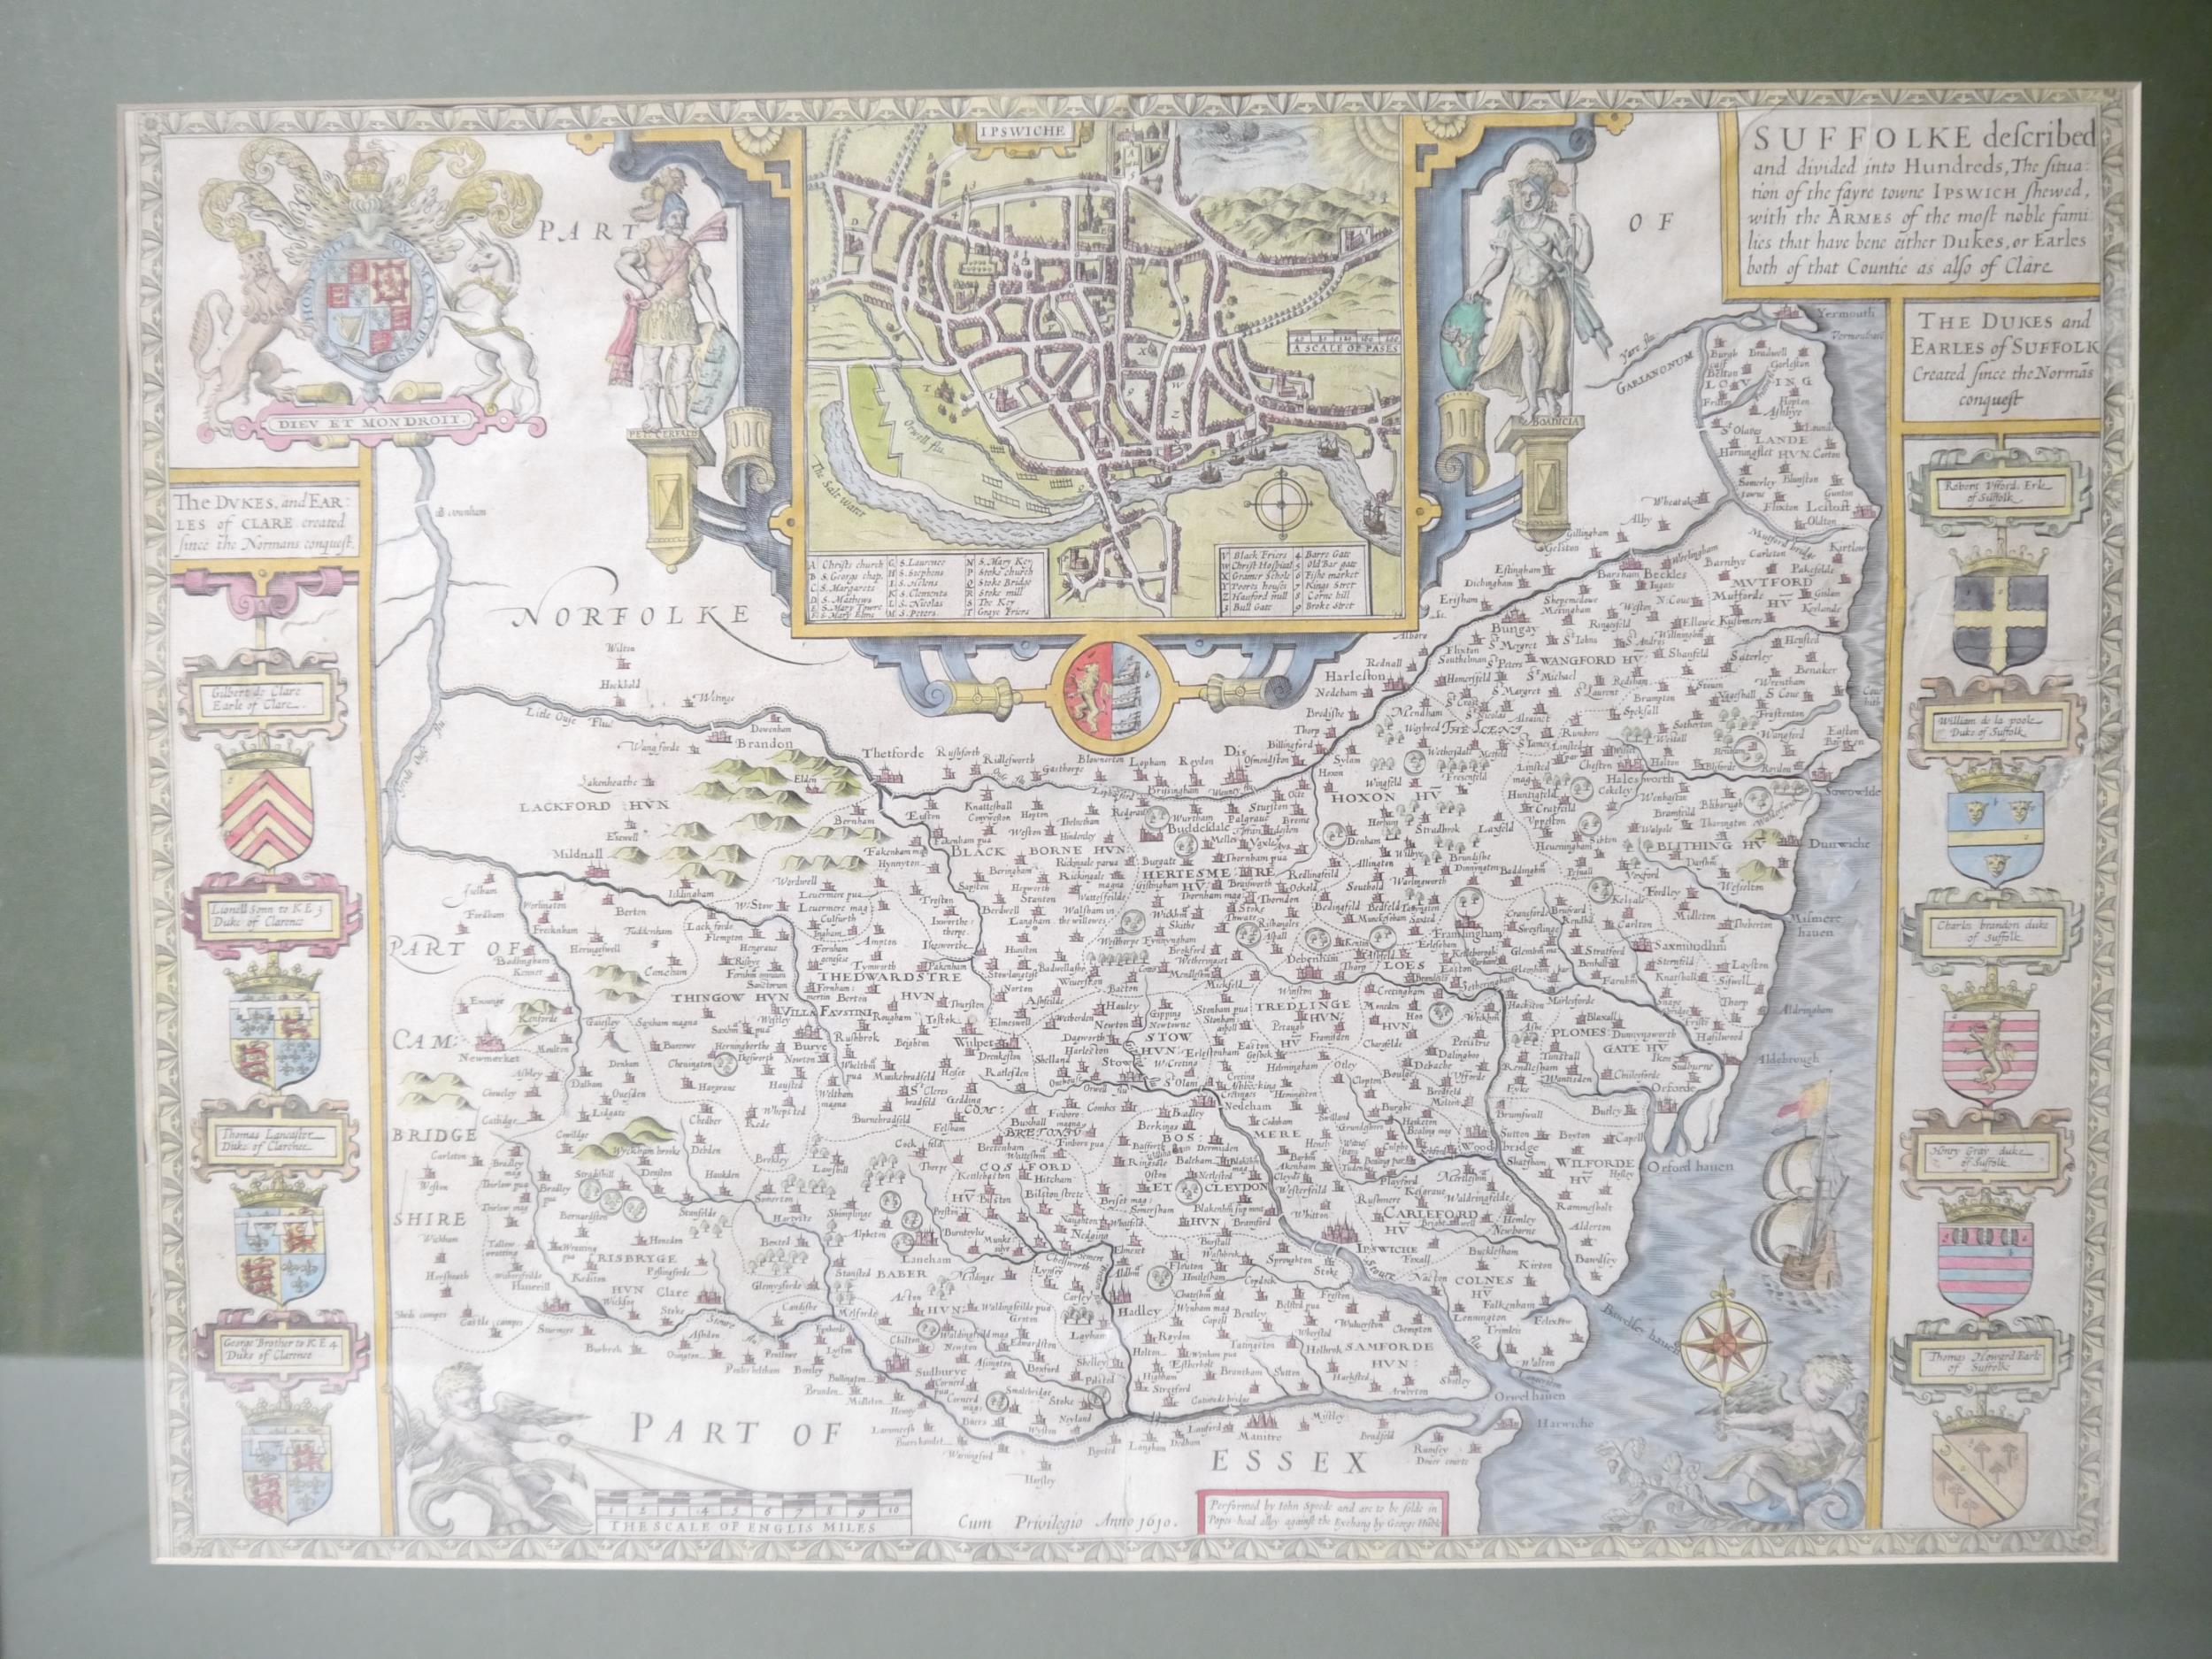 (Suffolk), John Speed: 'Suffolke described and divided into Hundreds', engraved hand coloured map, - Image 3 of 5